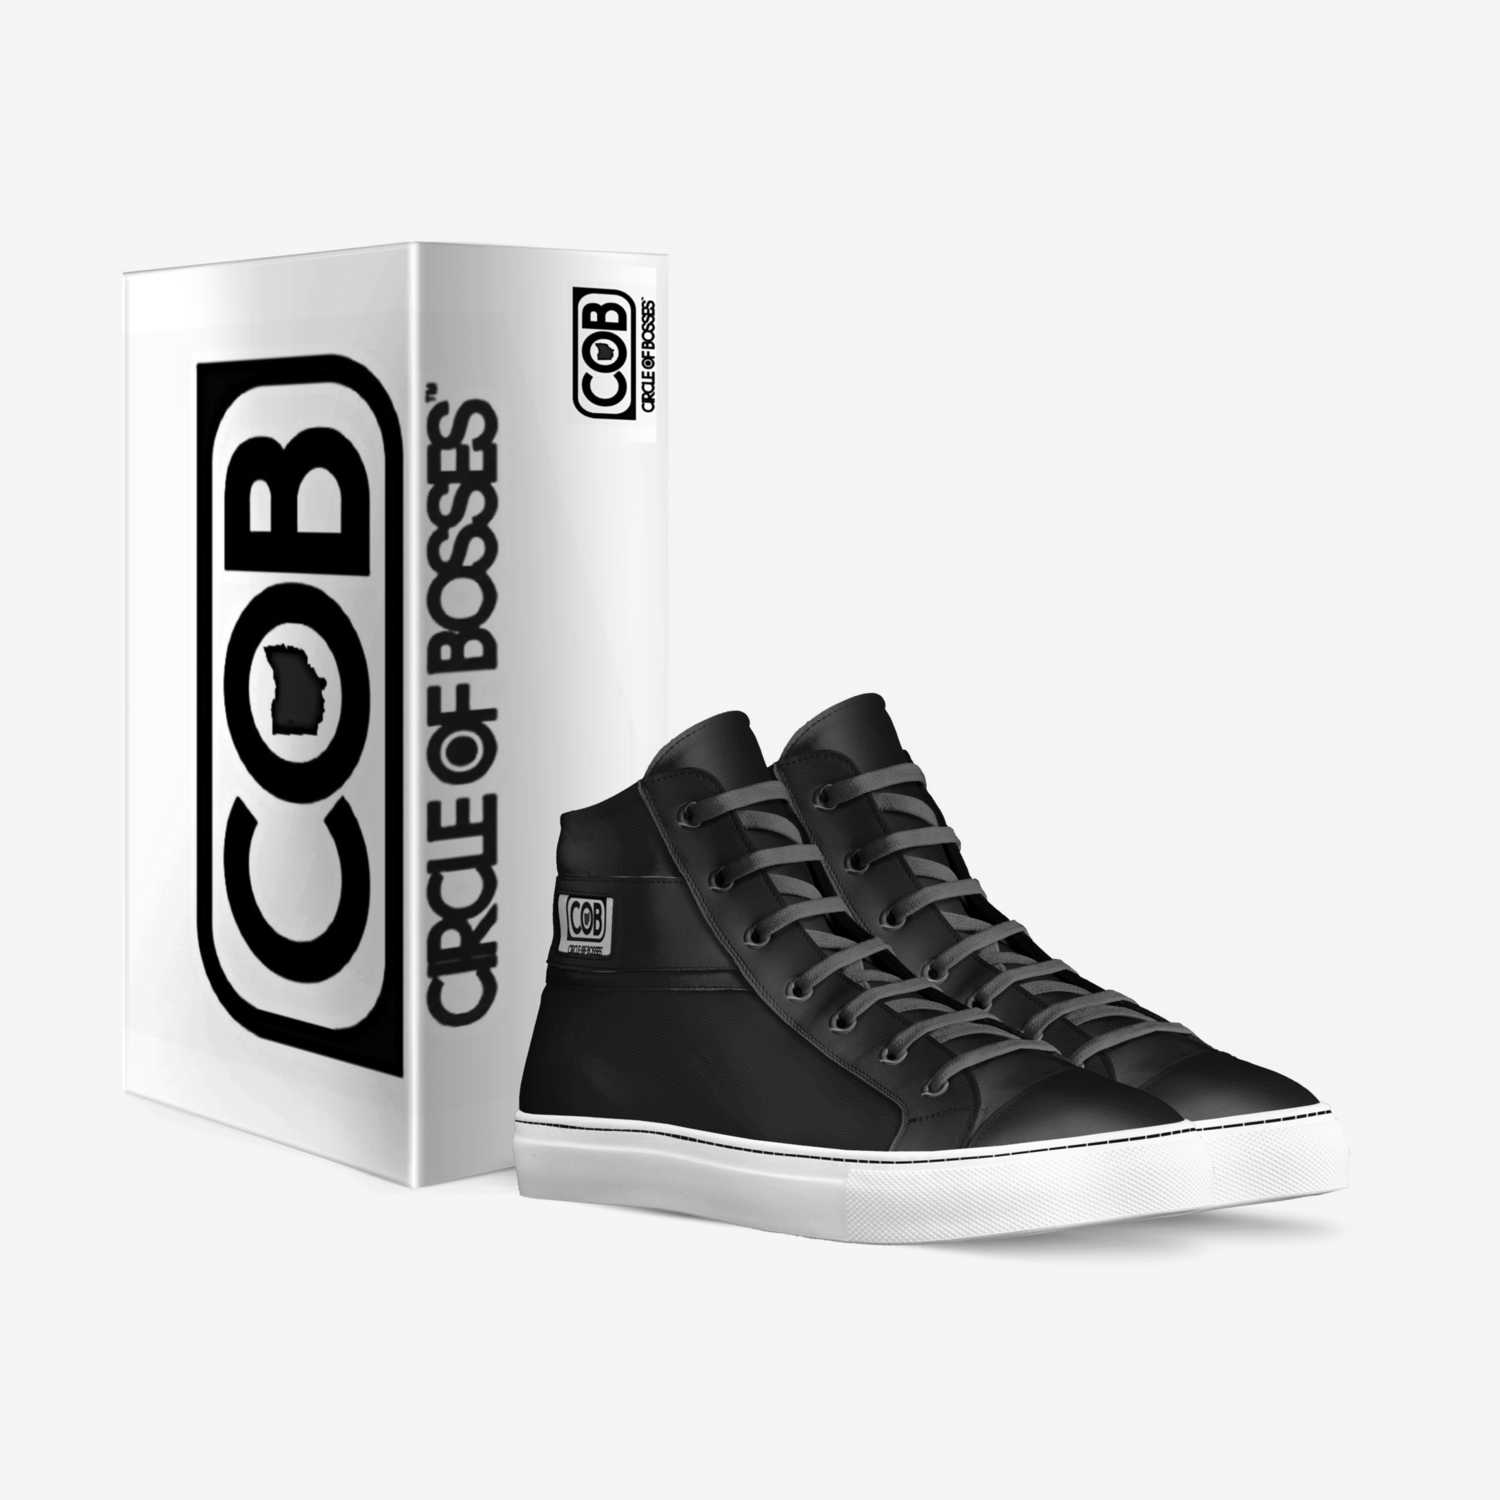 C.O.B Ohio custom made in Italy shoes by Anthony Burks | Box view